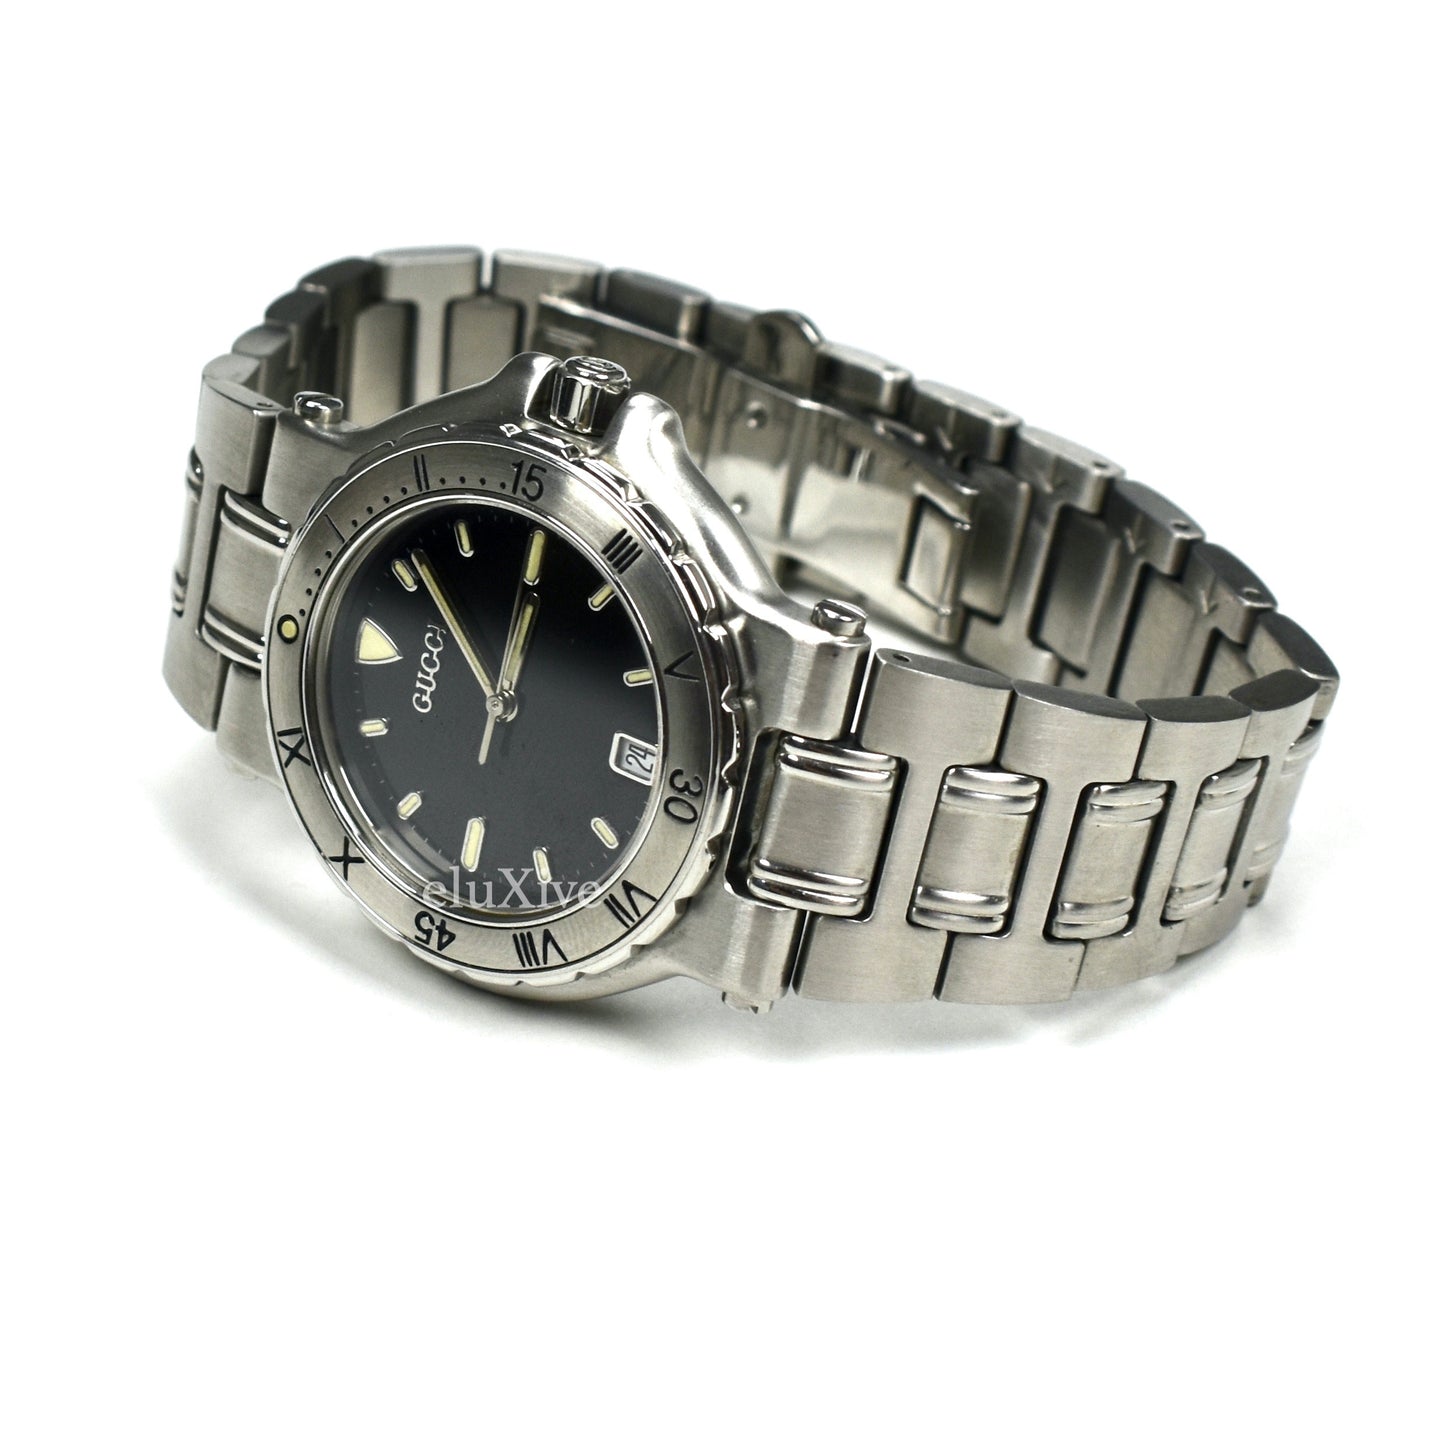 Gucci - 9700 Stainless Steel Black Dial Diver's Watch